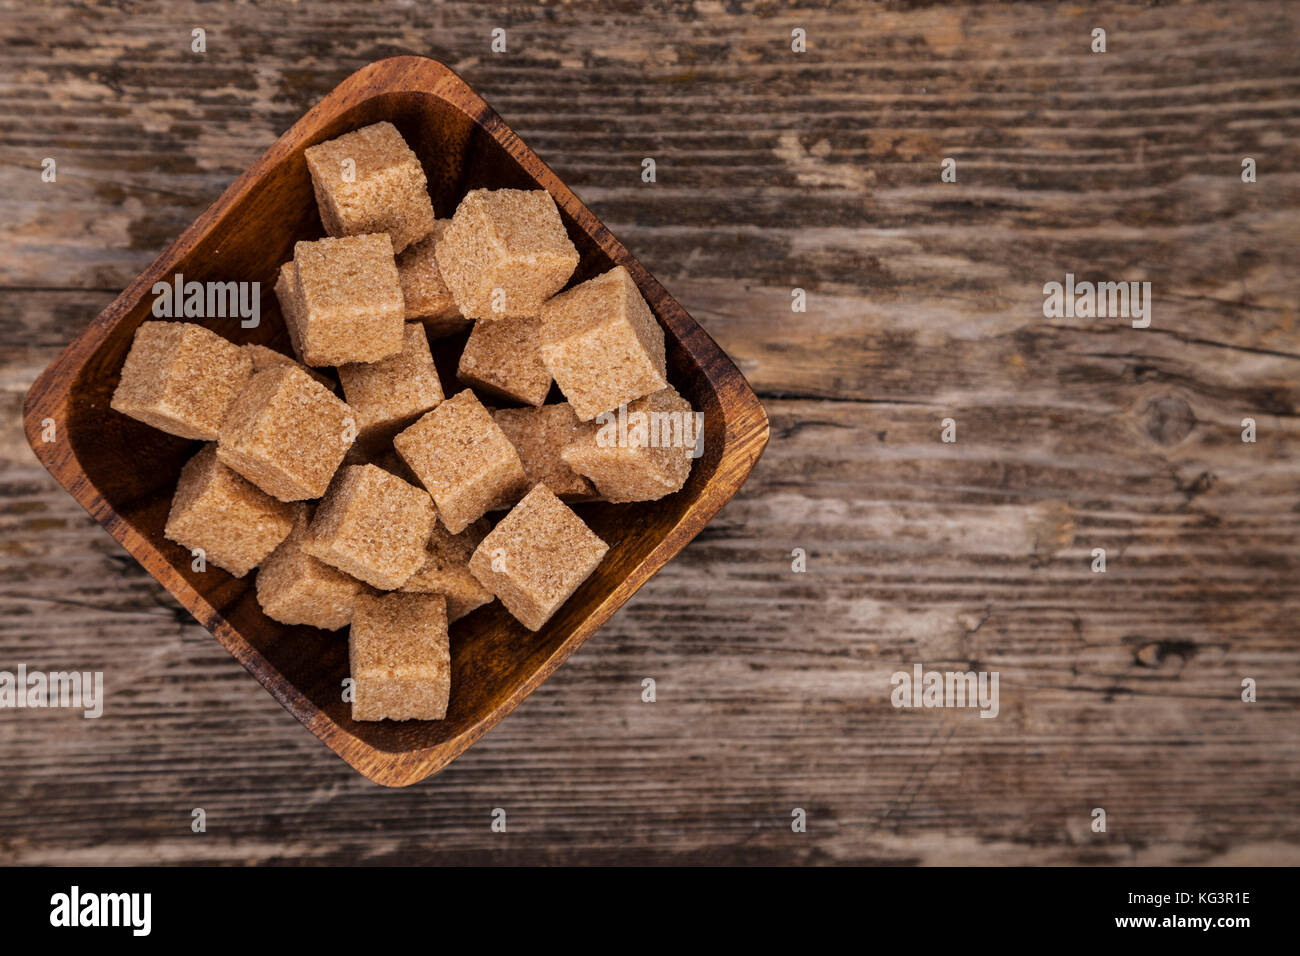 Bowl of brown sugaron an old wooden background, top view Stock Photo